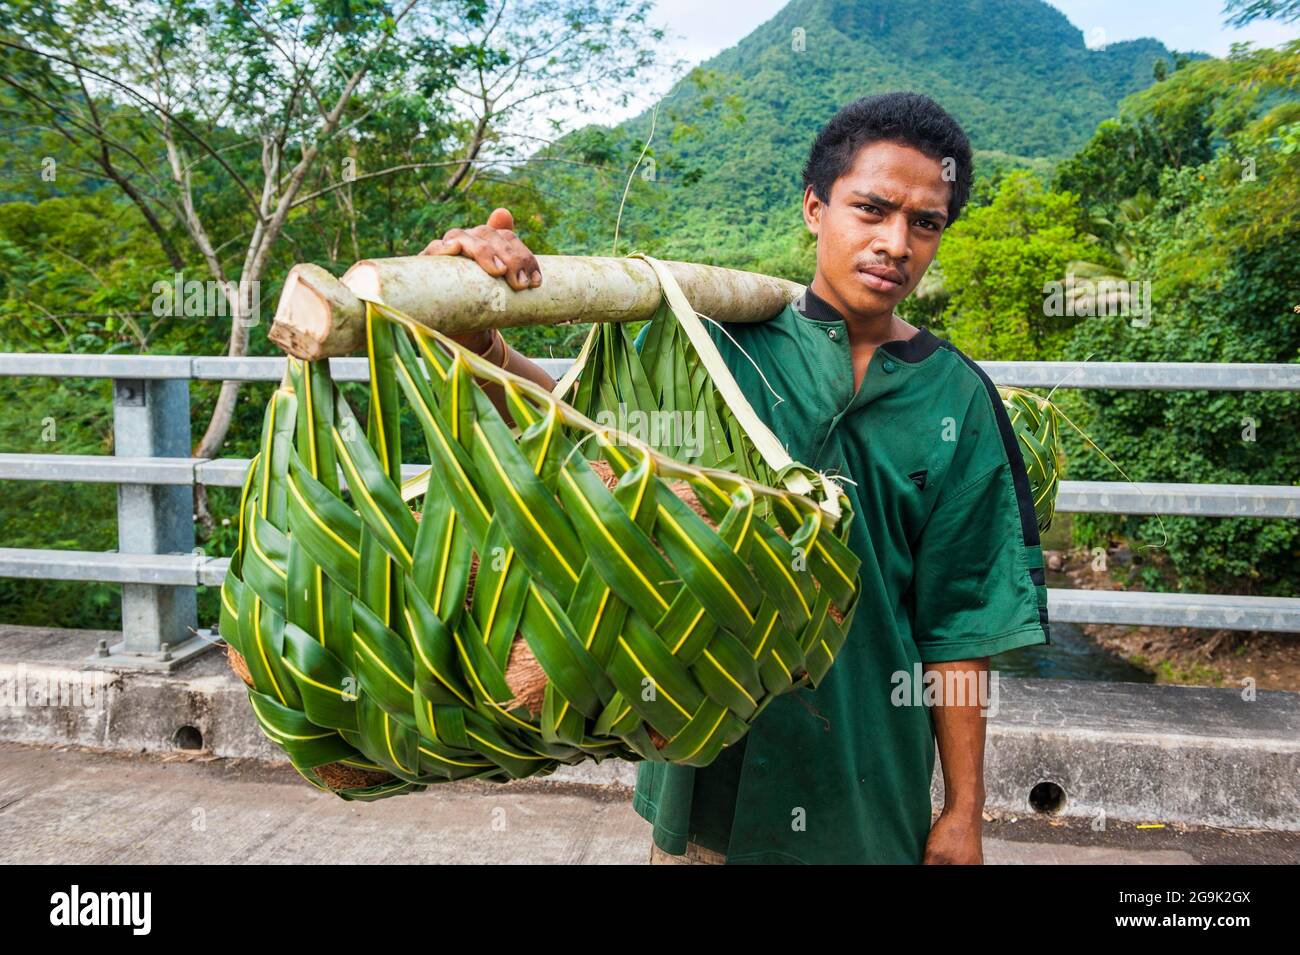 Local farmer bringing his goods in palm baskets back home, Upolo, Samoa, South Pacific Stock Photo